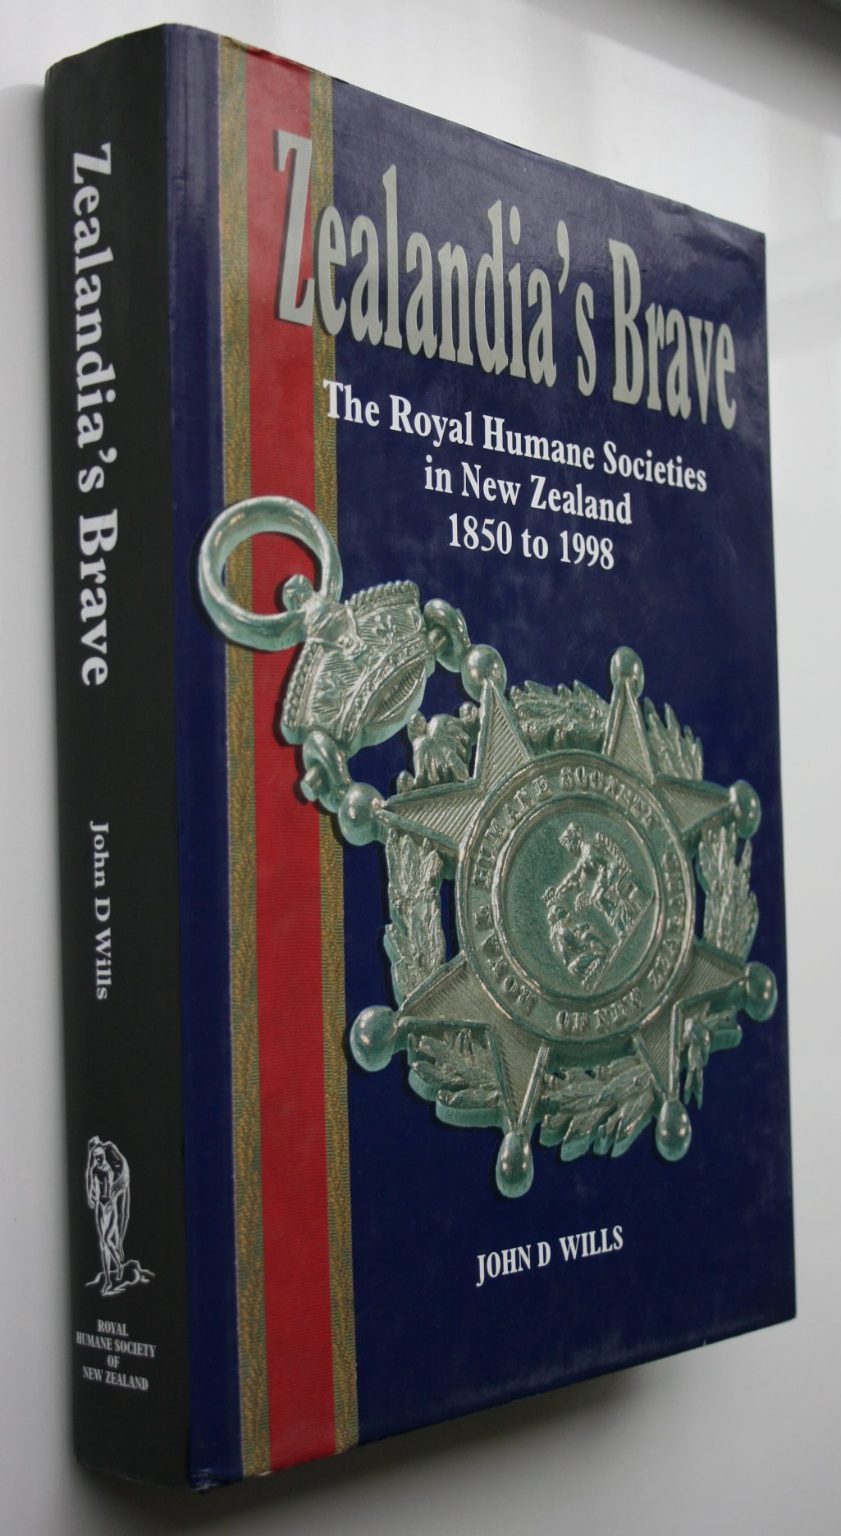 Zealandia's Brave: The Royal Humane Societies in New Zealand 1850 to 1998. by John D Wills.